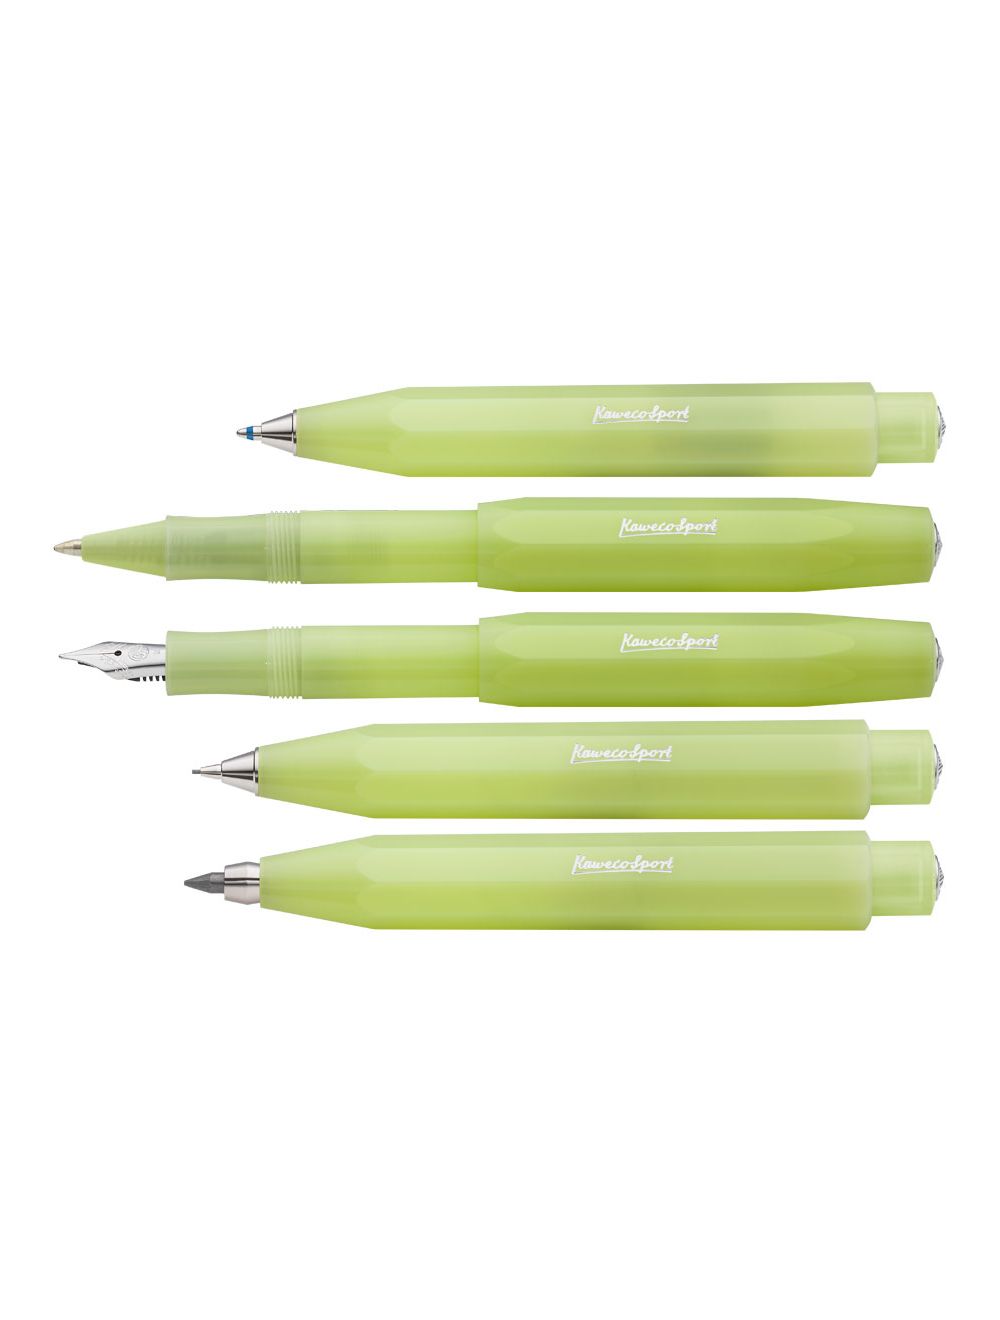 Kaweco Frosted Sport Fine Lime Luxury ballpoint or fountain pen with  engraving, brands Parker, Waterman, Cross, Sheaffer, Diplomat, Lamy